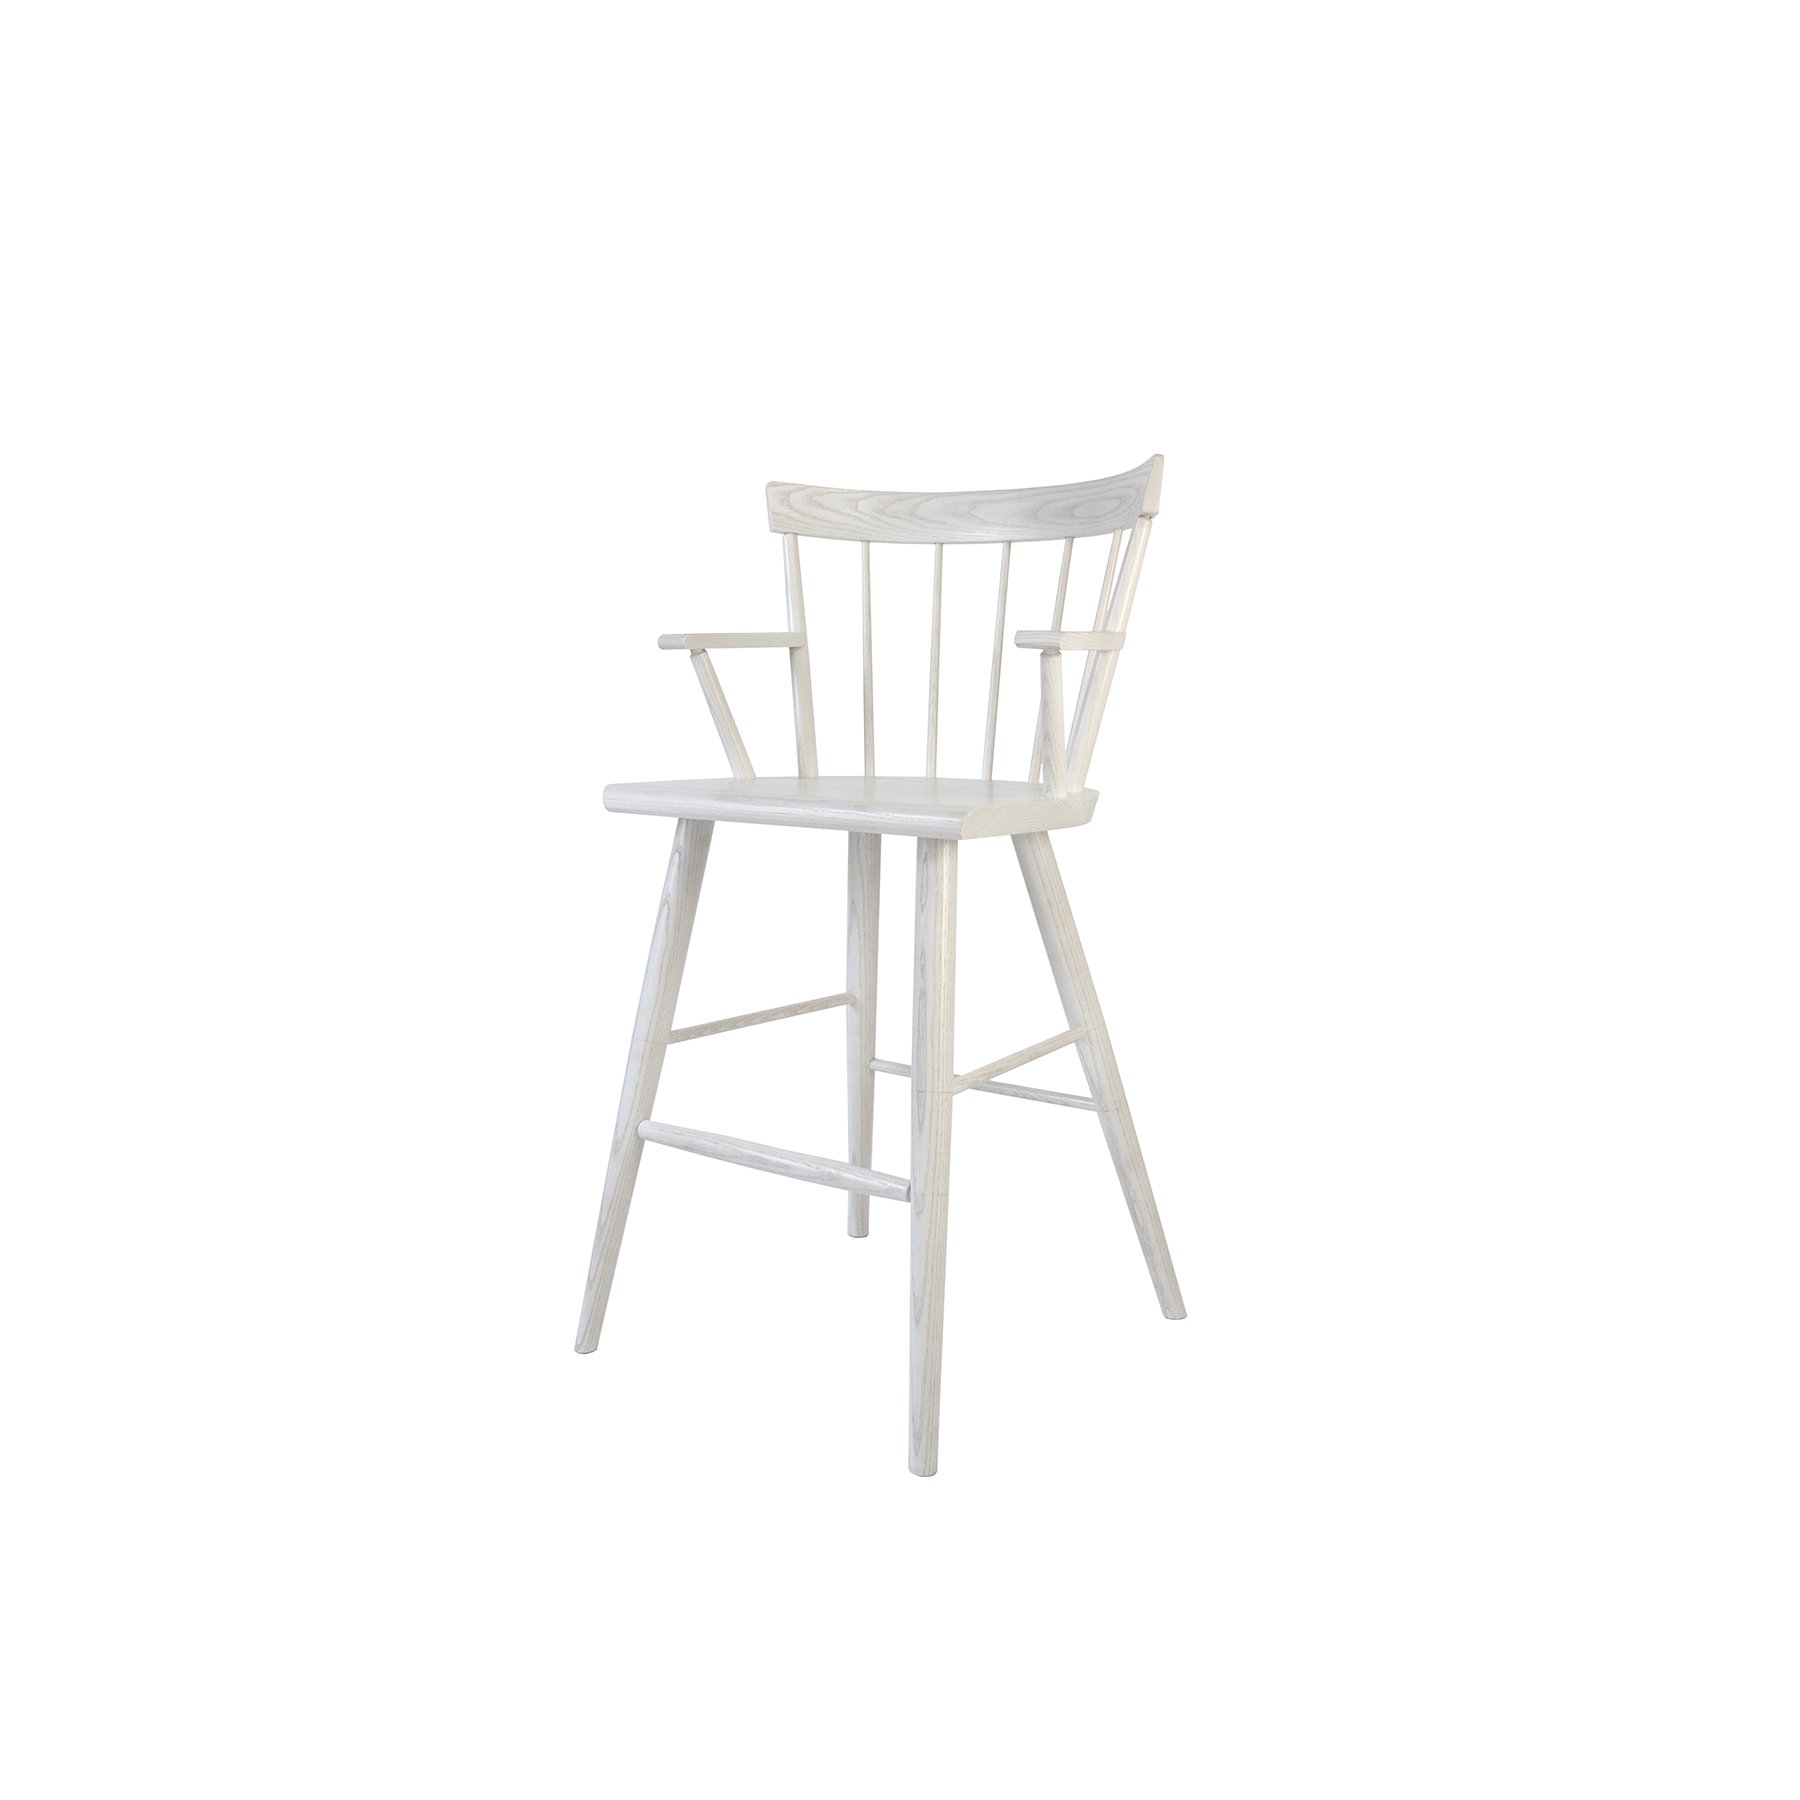 COLT COUNTER STOOL WITH ARMS 24” - $1,515